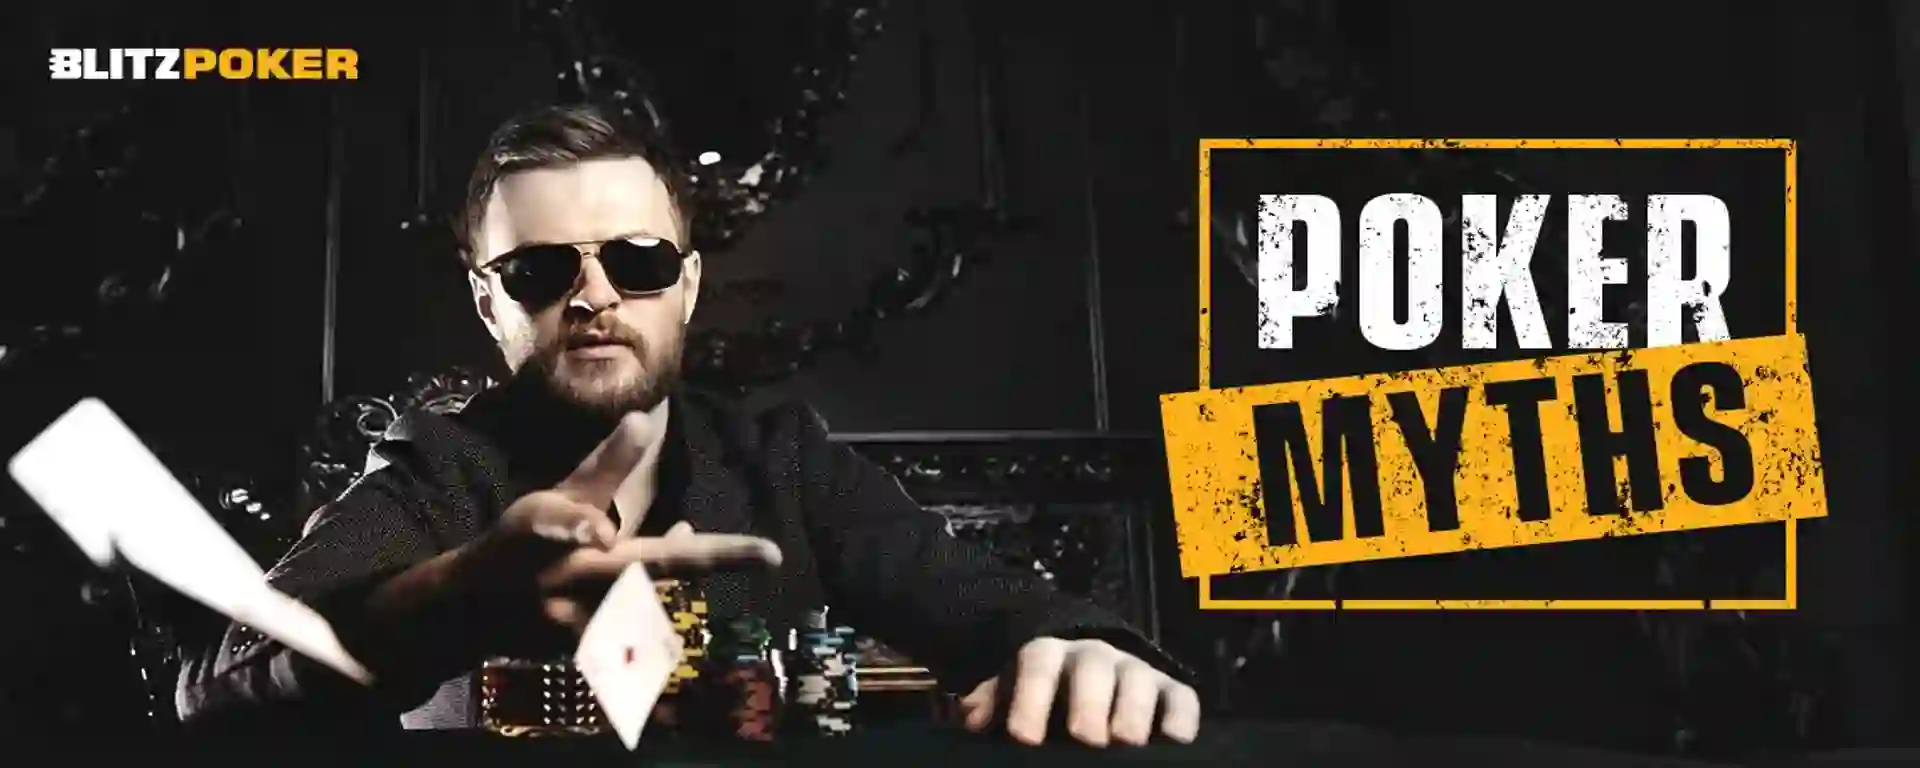 10 Poker Myths That You Should Never Believe